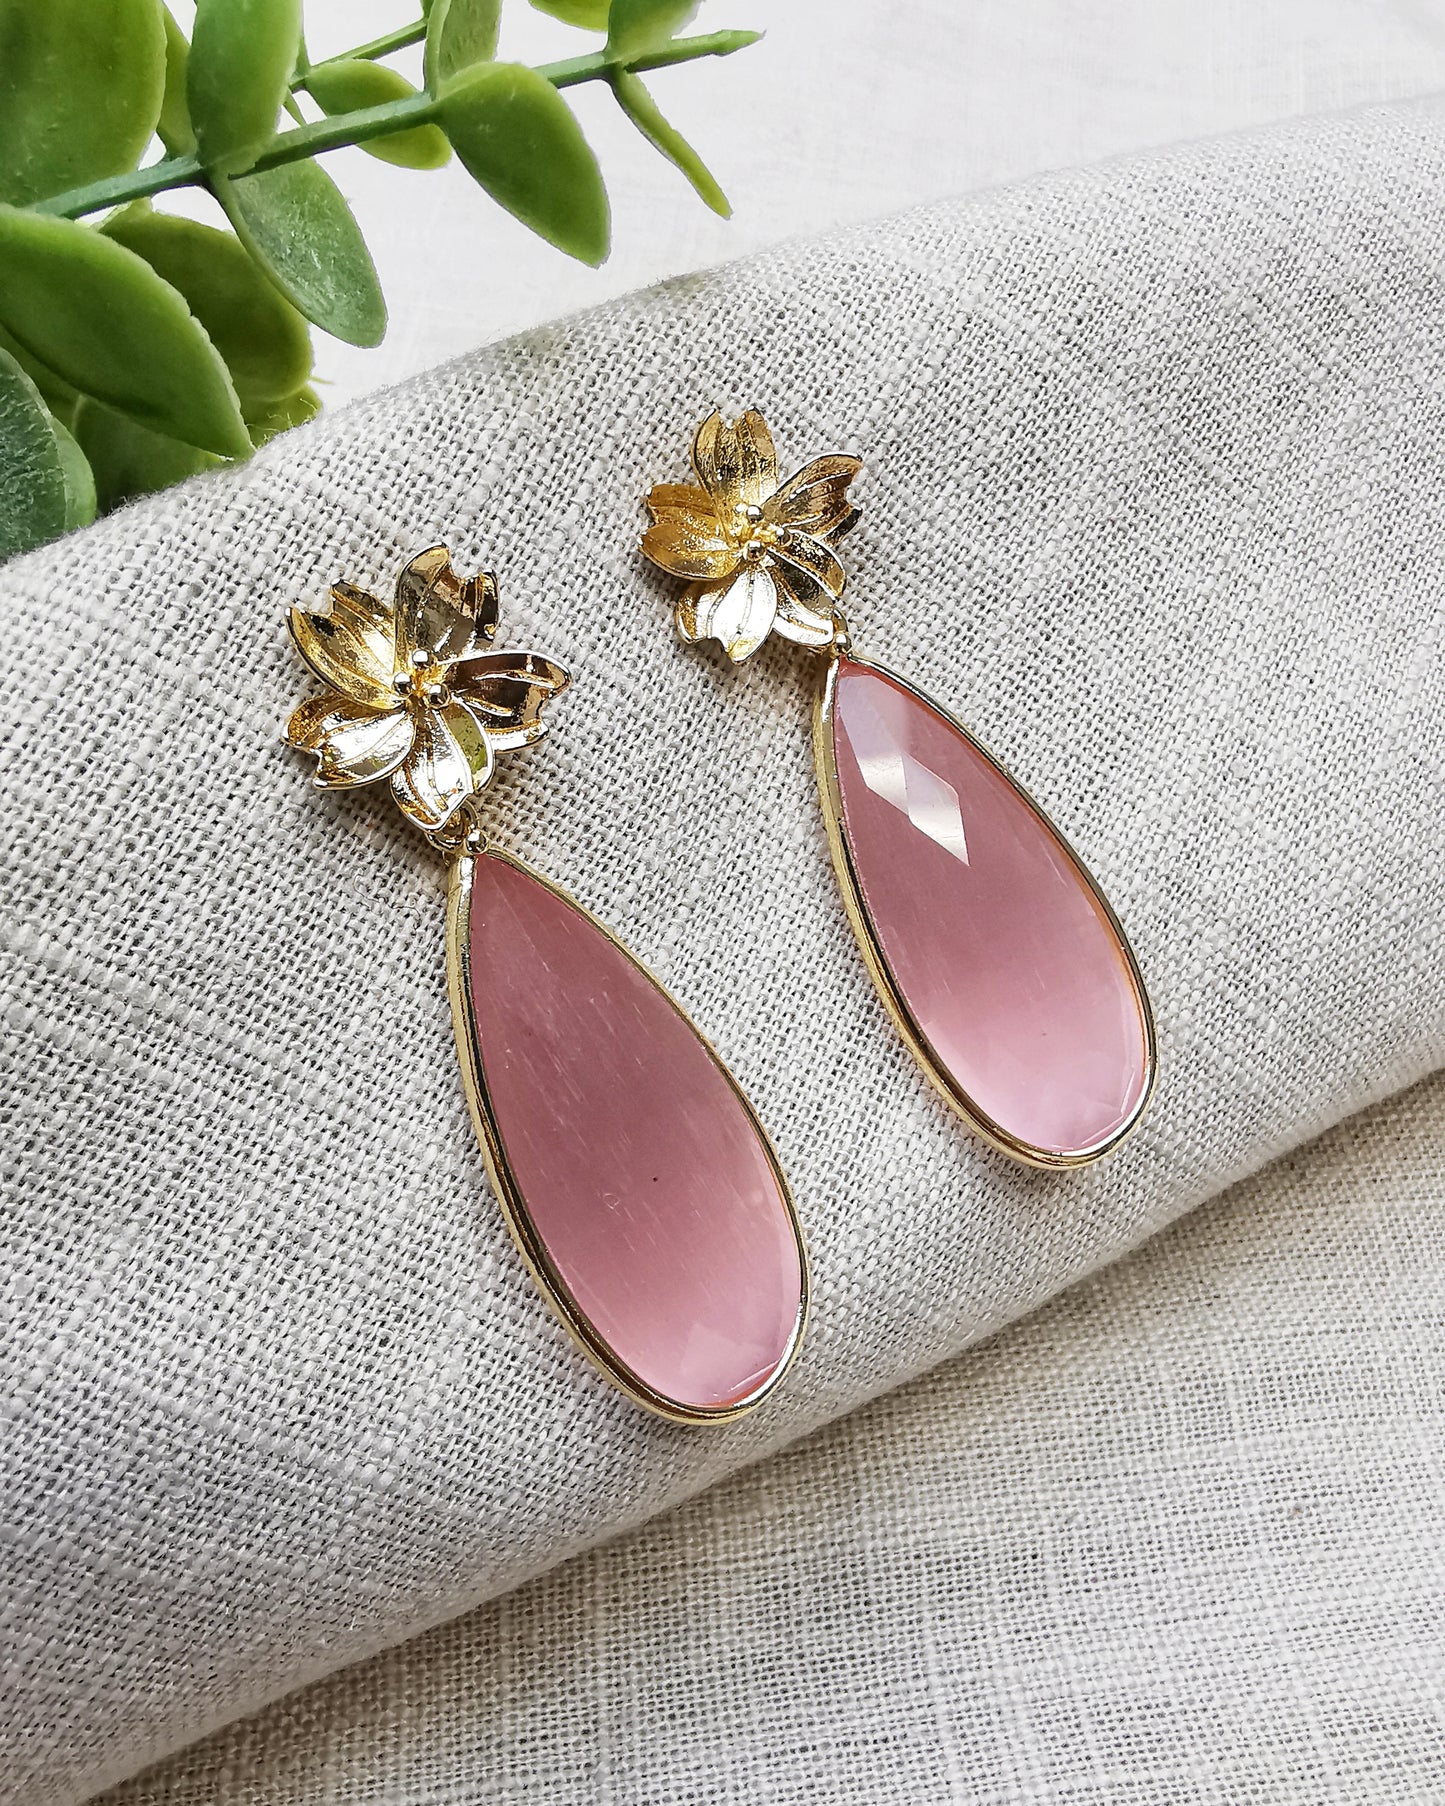 Pink Blush Monalisa Statement Earrings with Floral Ear Post- LIMITED EDITION